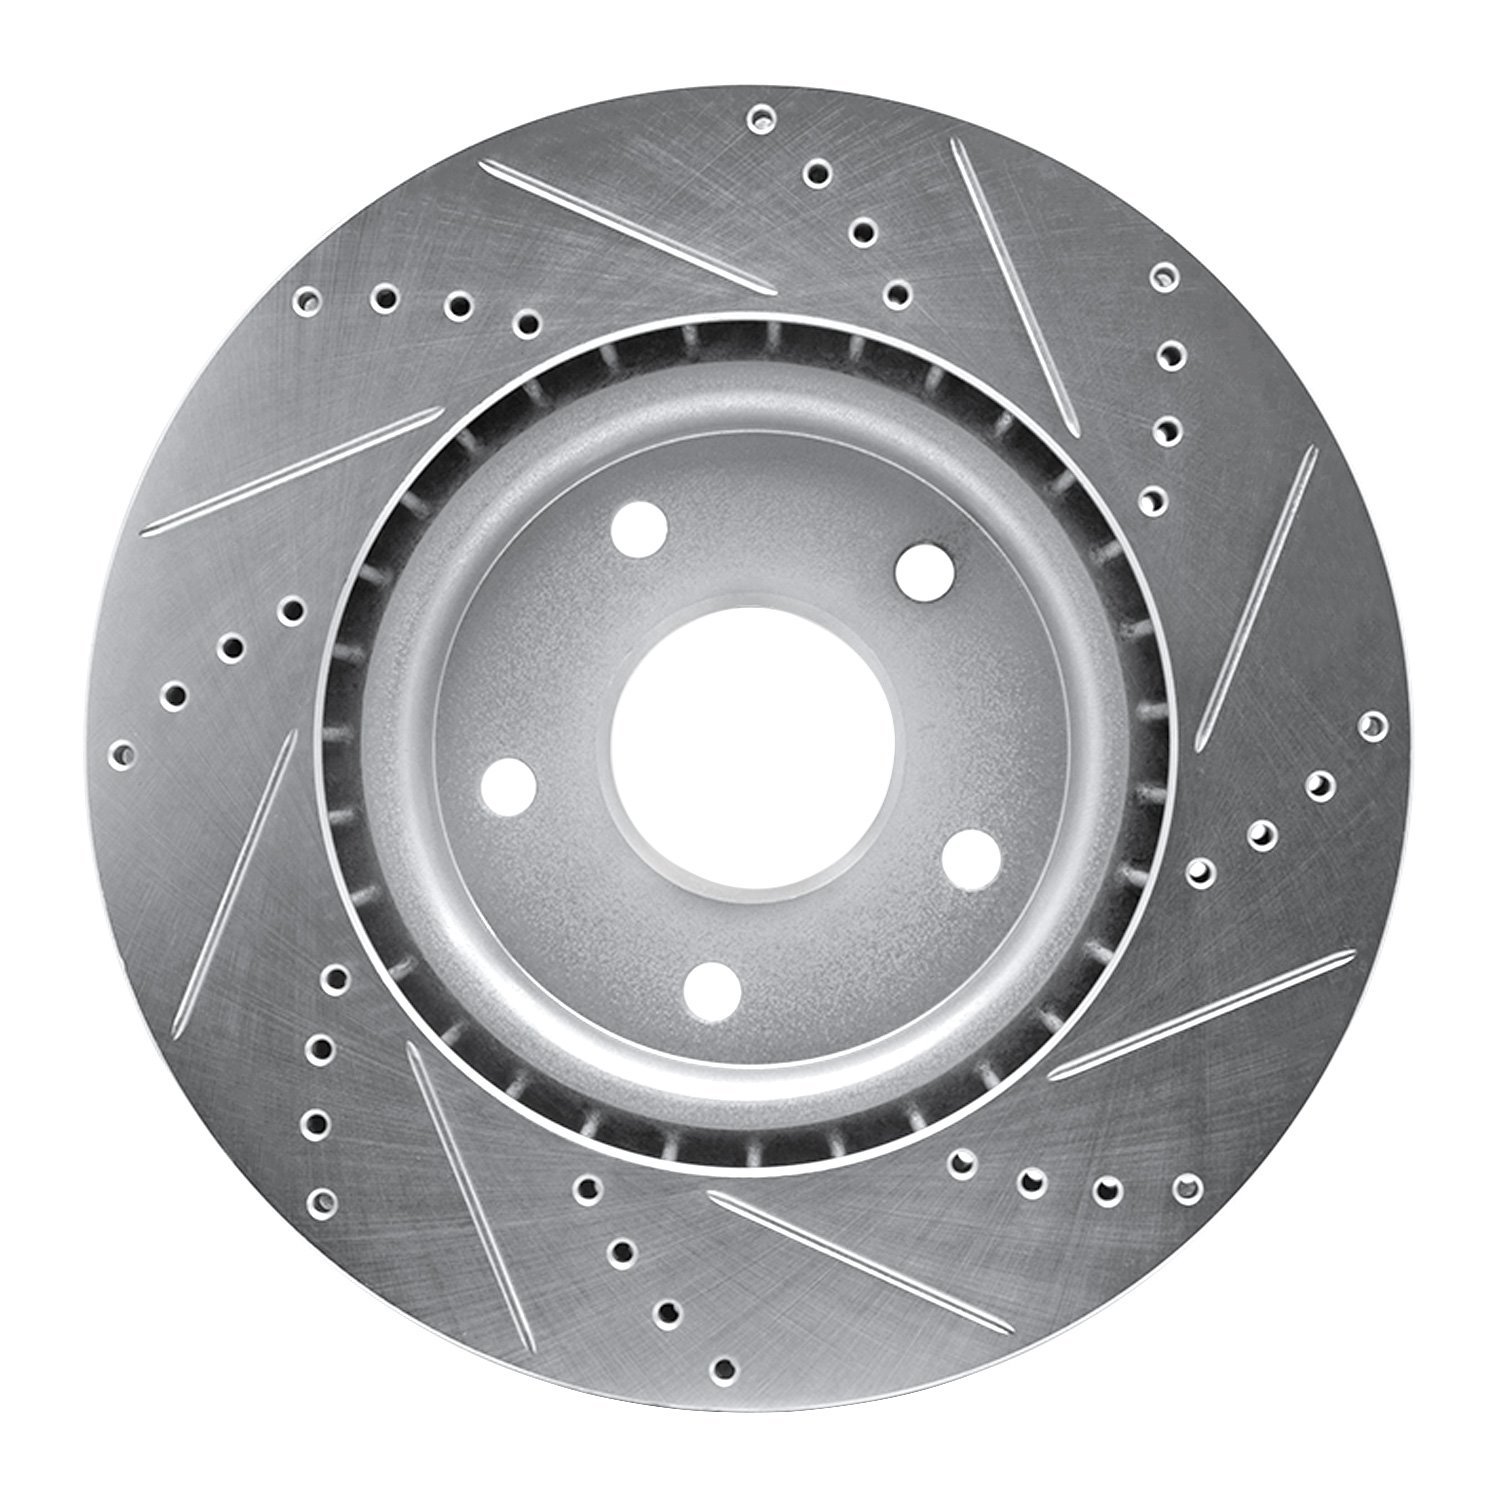 E-Line Drilled & Slotted Silver Brake Rotor, Fits Select Fits Multiple Makes/Models, Position: Front Left